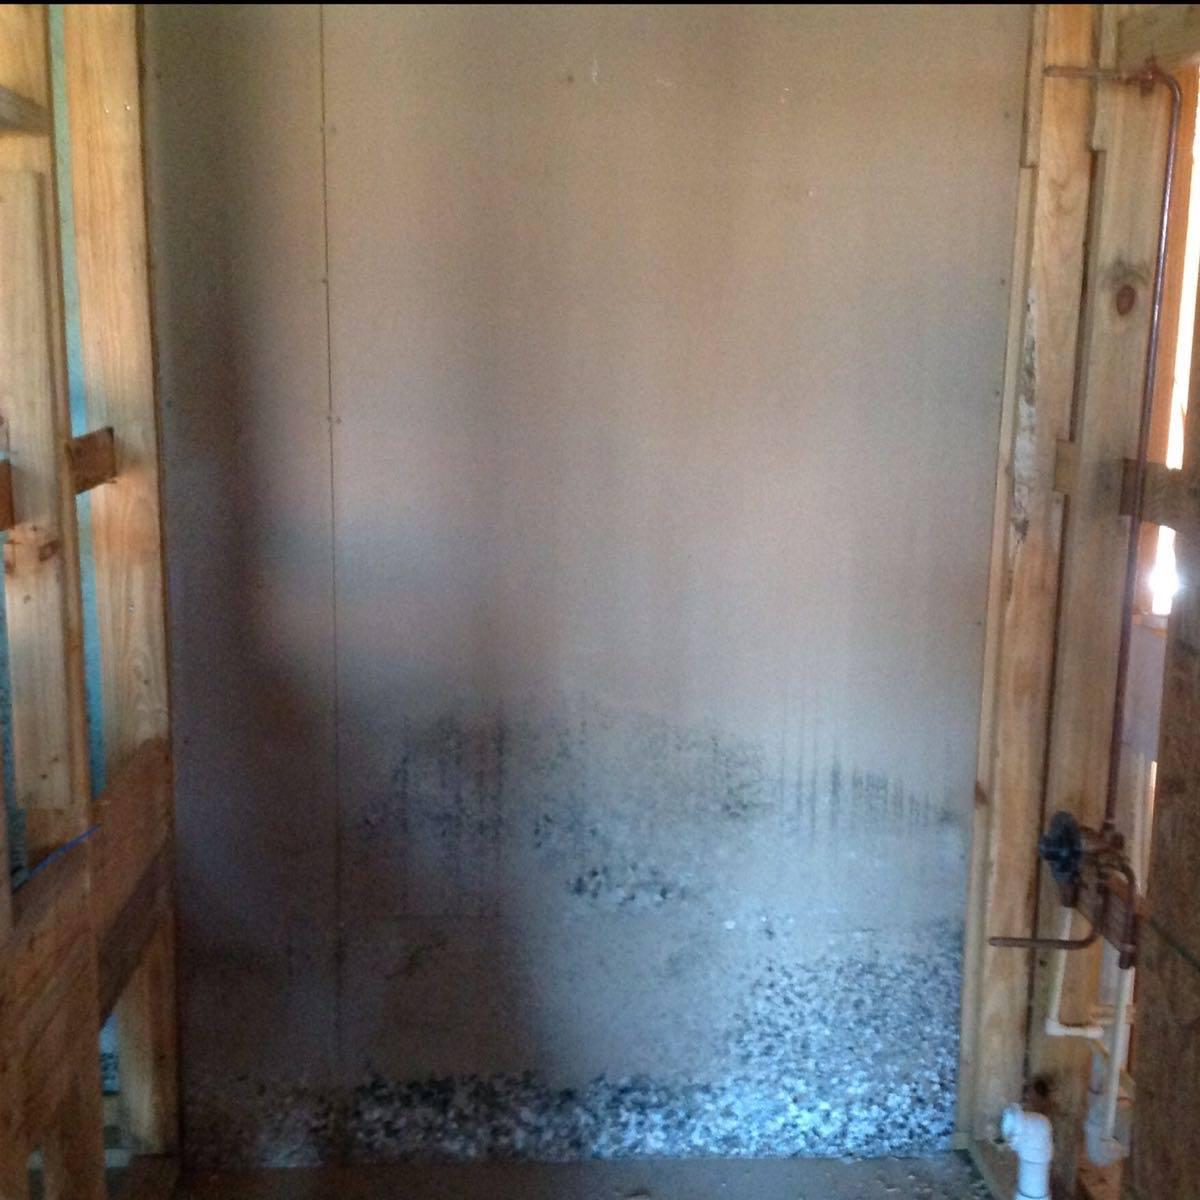 All companies and individuals who perform mold- related activities in Texas must be licensed by TDLR(The Department of Licensing and Regulation). SERVPRO of Tyler is one of the few licensed in Texas to preform Mold Remediation & Restoration efforts.